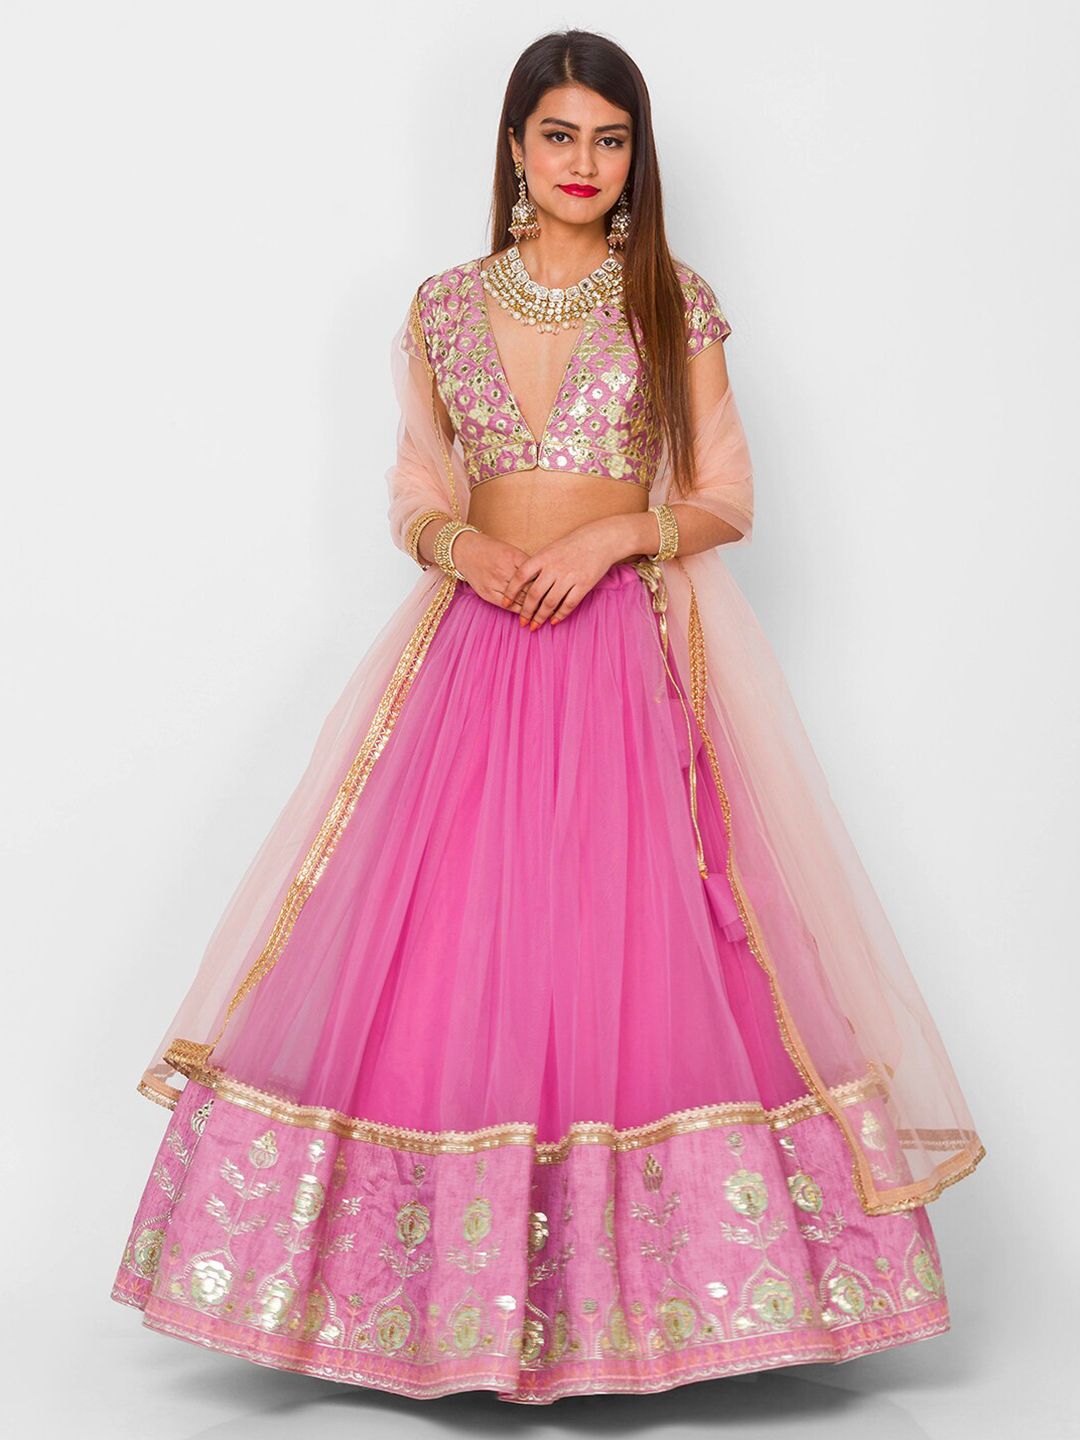 6Y COLLECTIVE Lavender & Gold-Toned Semi-Stitched Lehenga & Unstitched Blouse With Dupatta Price in India